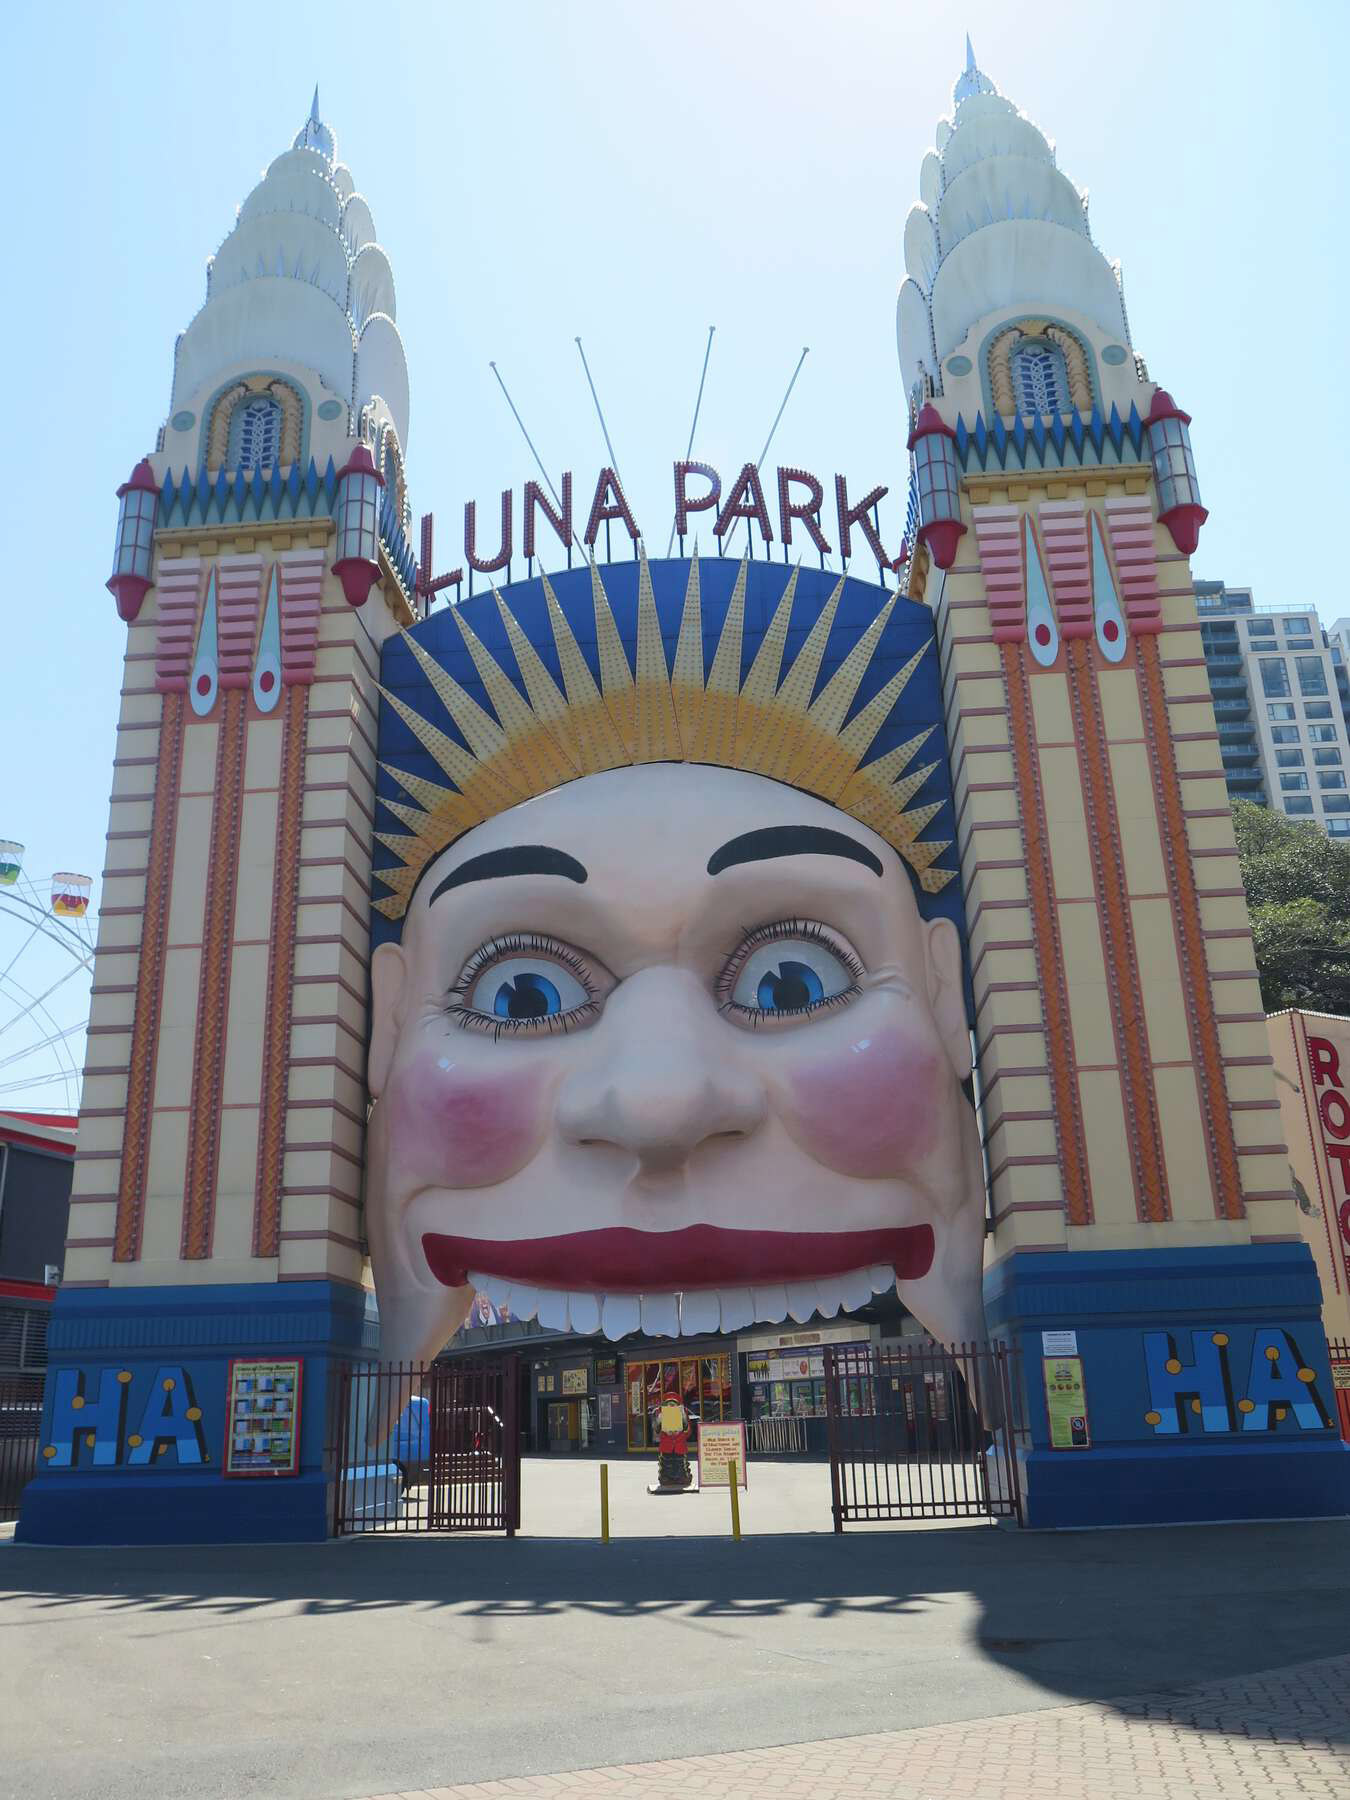 Colorful theme park entrance with an enormous smiling face above and two flanking towers.